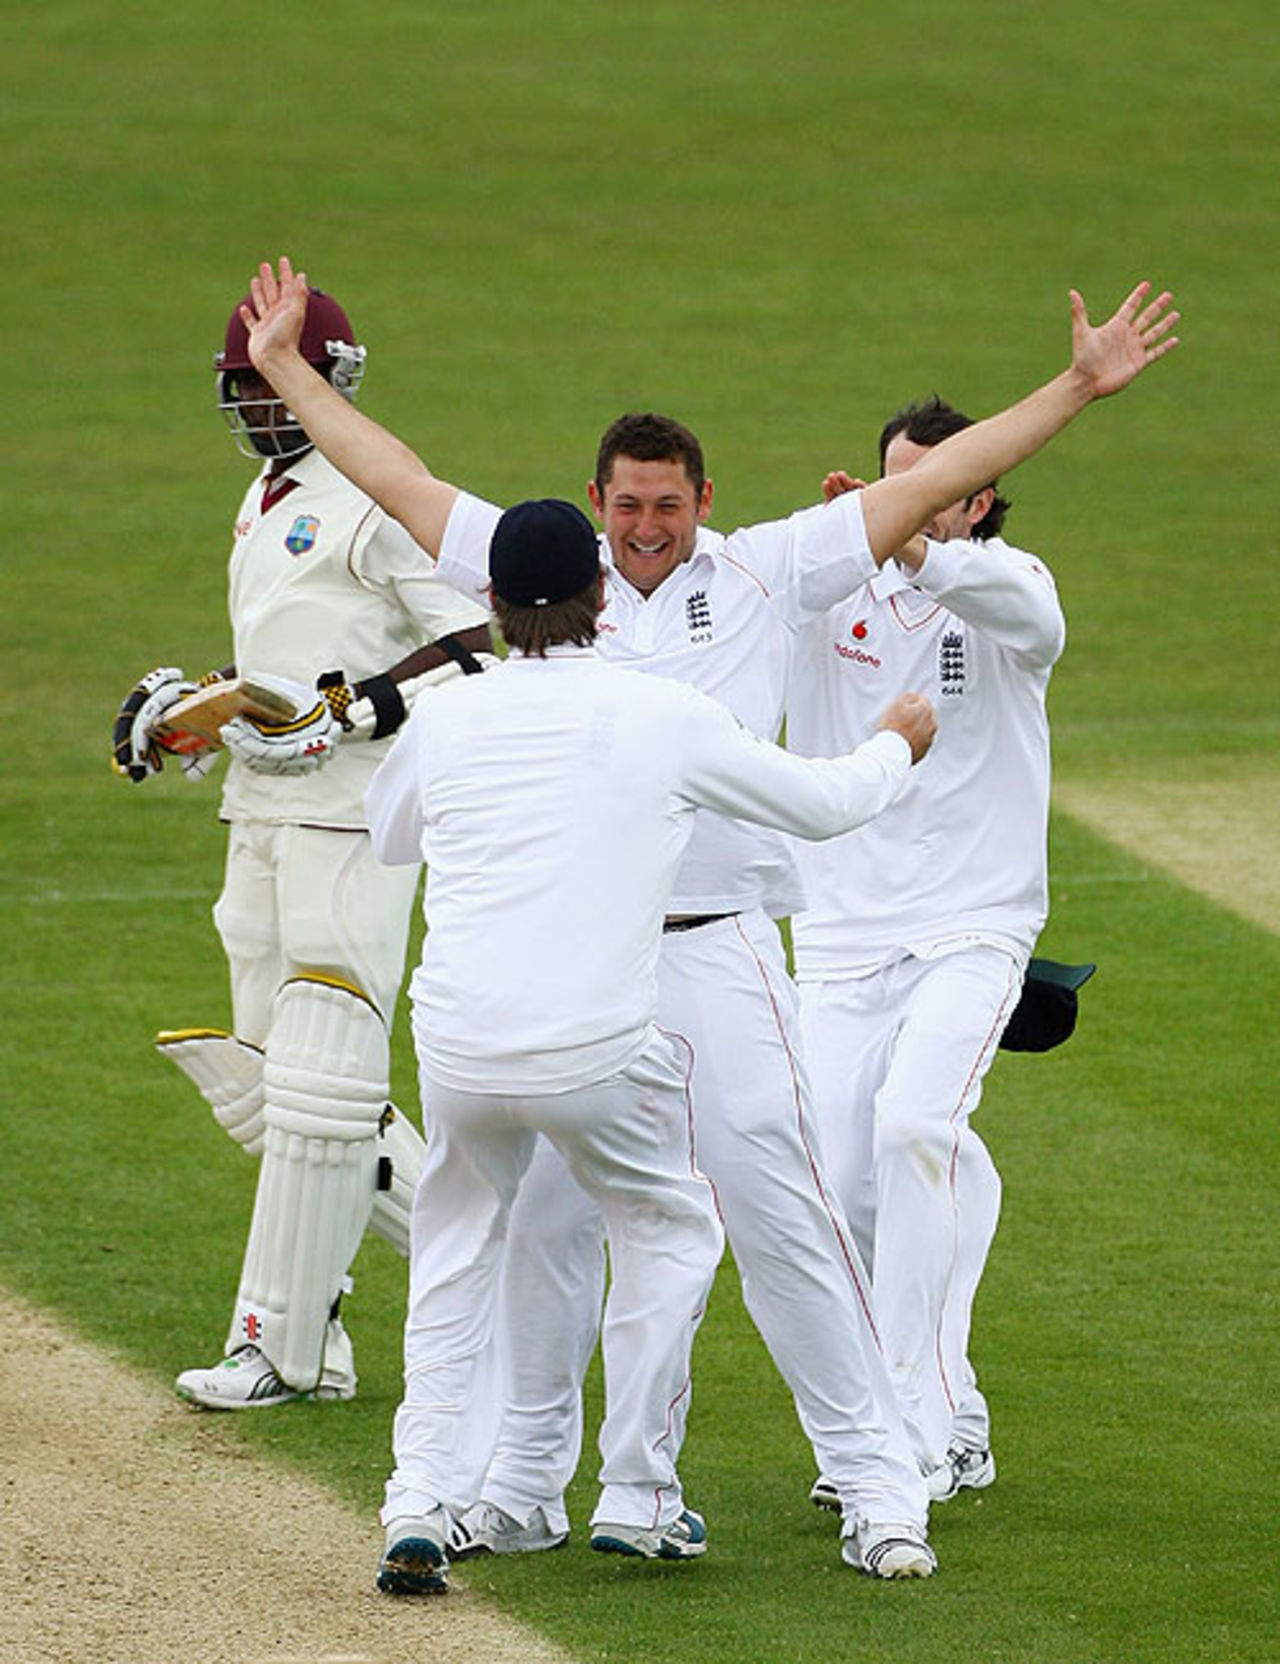 Tim Bresnan celebrates victory with his team-mates after claiming the final wicket, England v West Indies, 2nd Test, Chester-le-Street, 5th day, May 18, 2009